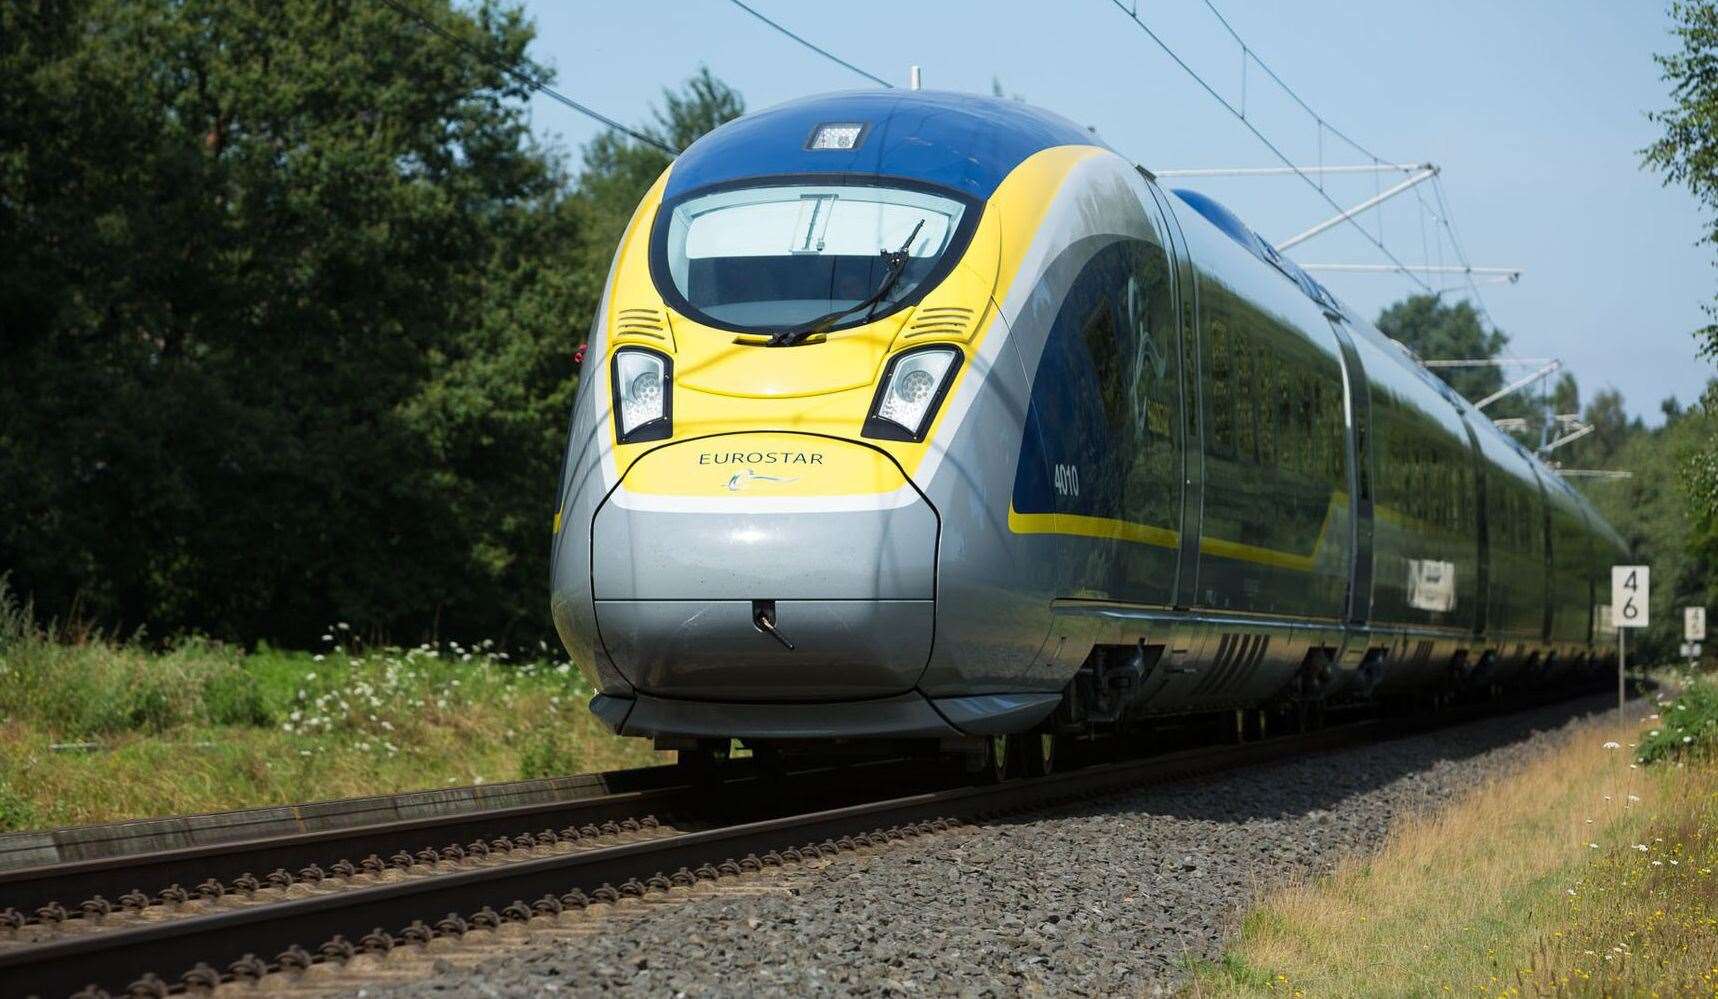 Eurostar services were pulled from Kent stations during lockdown